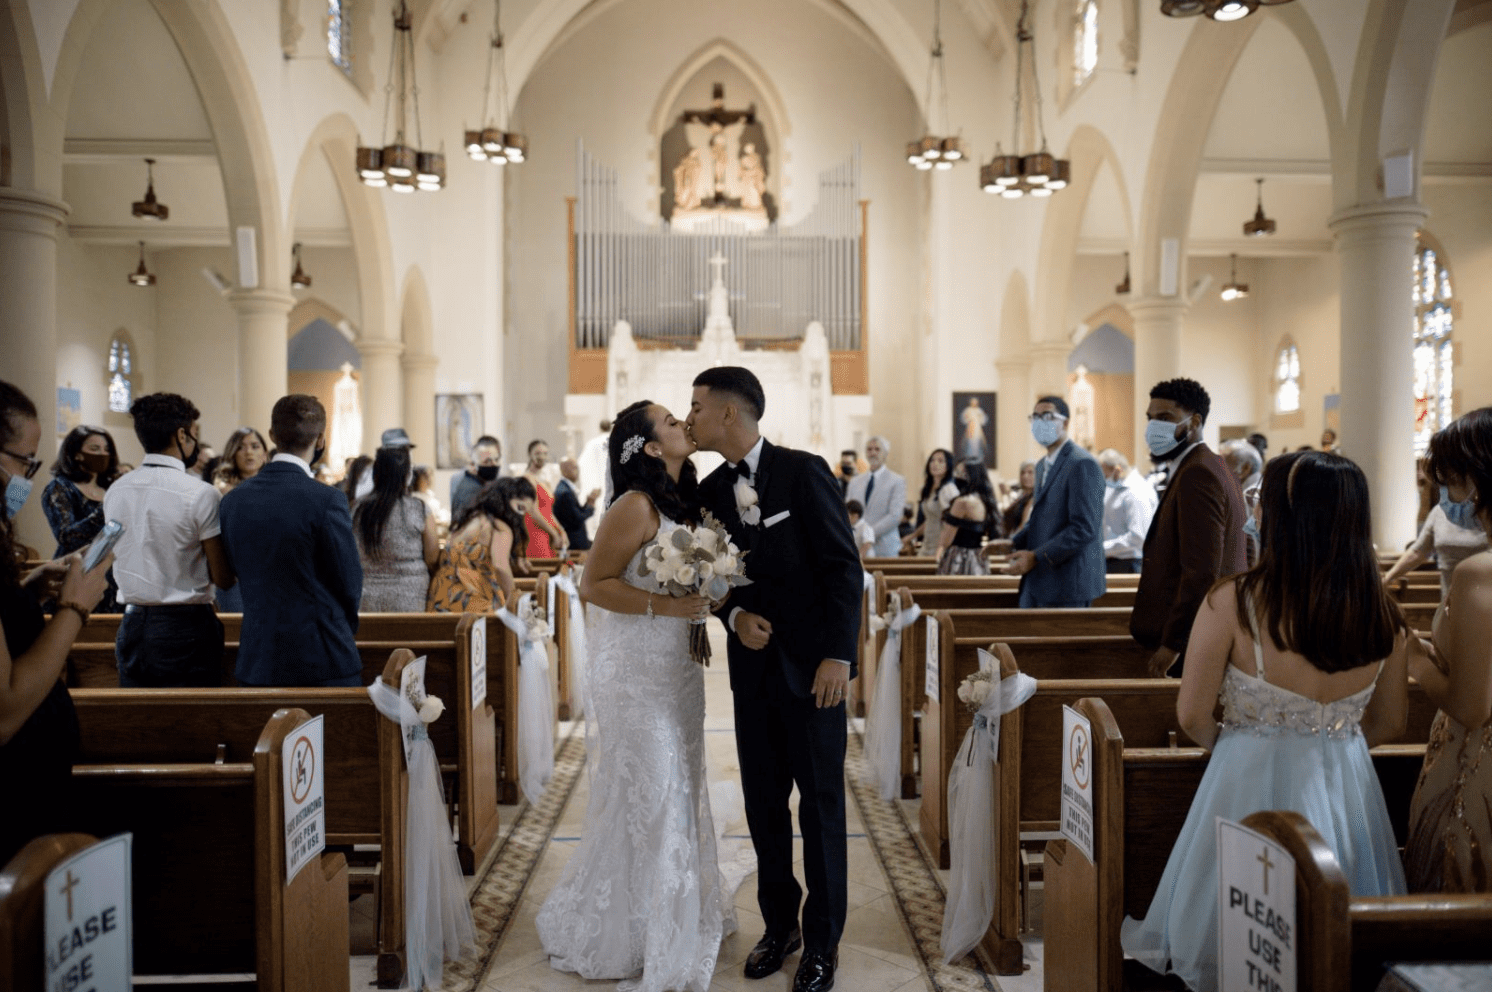 Rebecca and Agustin Vazquez were married in Lyndhurst at Sacred Heart in 2020. For the young couple, who were married during the pandemic, the road to their wedding took many last-minute twists and turns, but they were determined to make it happen. (File photo courtesy of the Vazquez's)